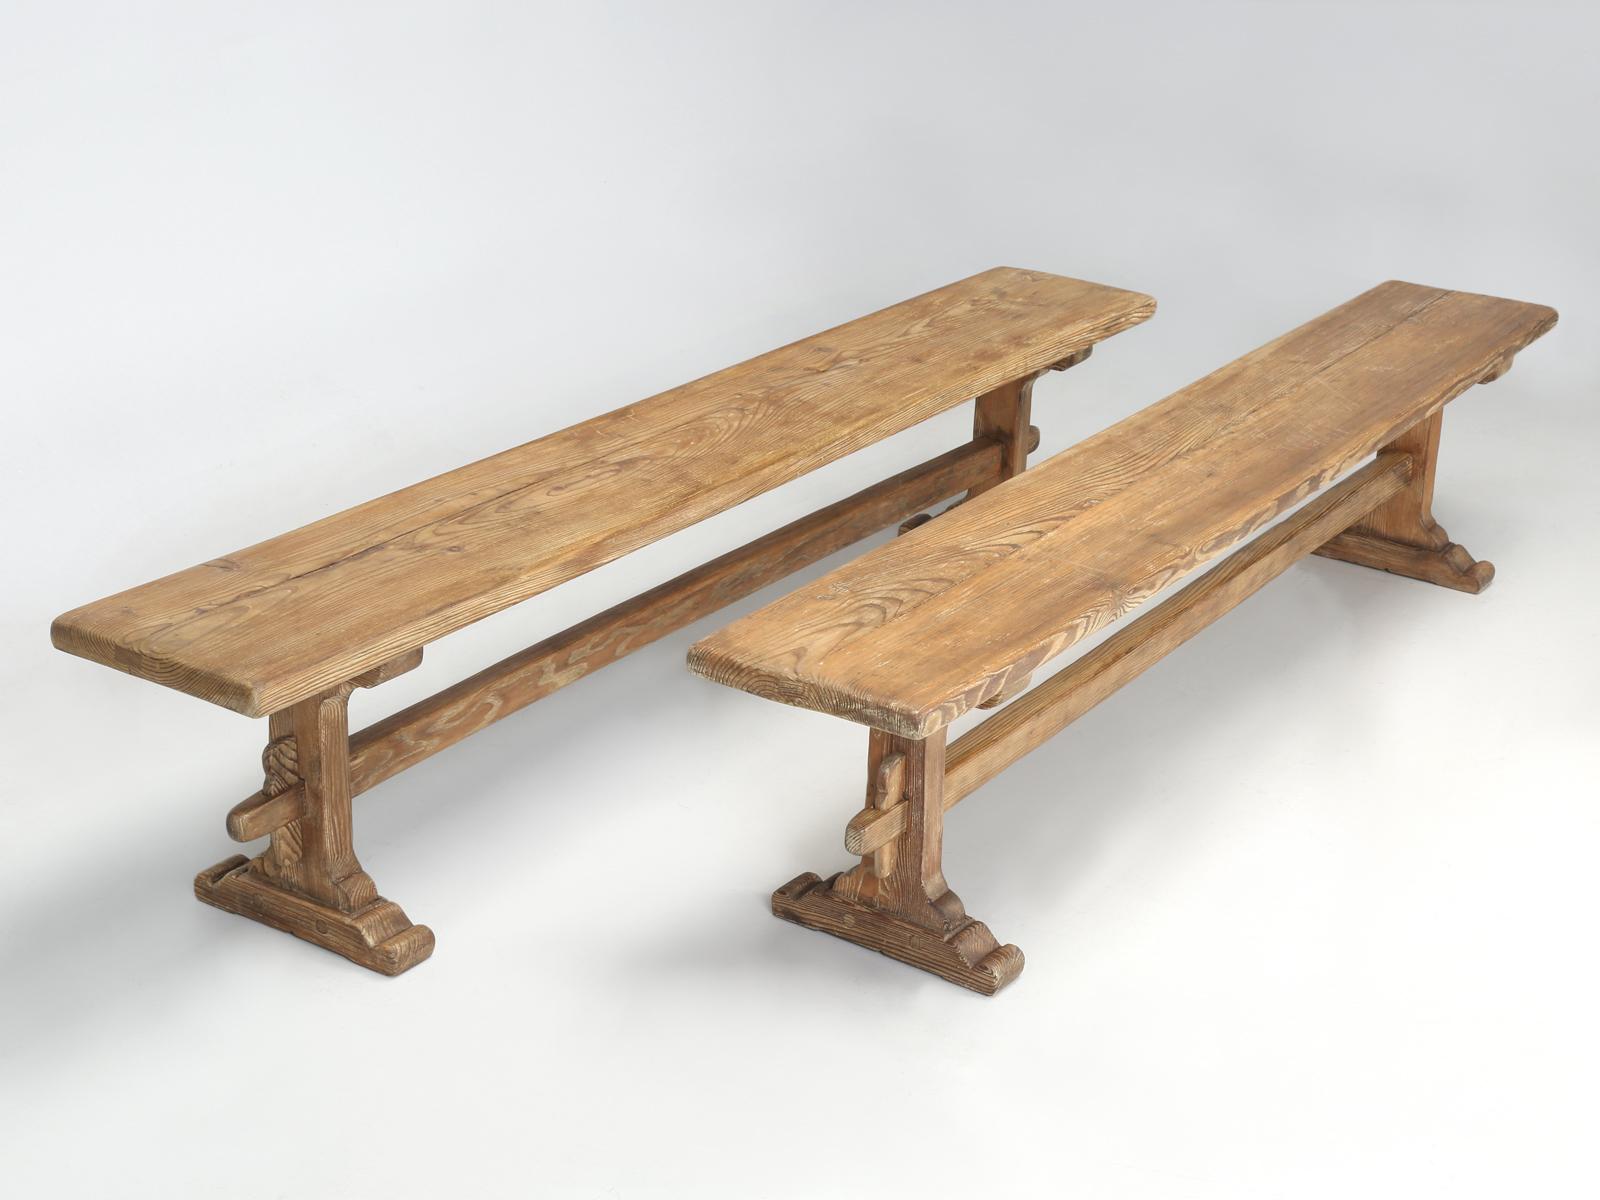 Antique pair of scrubbed pine benches, that were probably used in conjunction with an old farm style dining table. Our Old Plank restoration department rebuilt the benches structurally and our finishing department just applied a protective